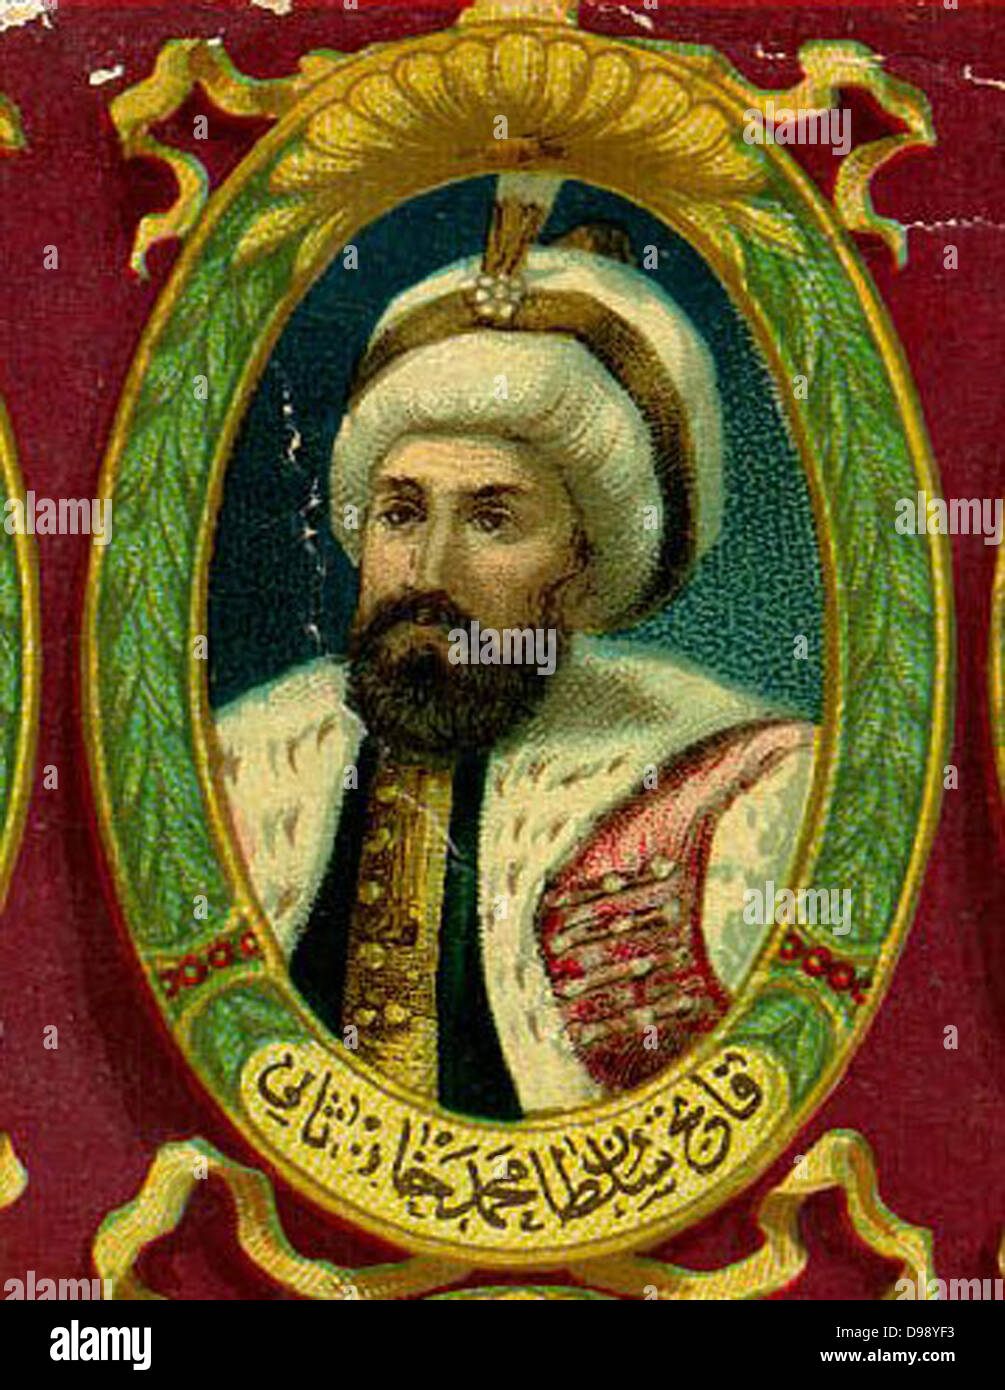 Mehmet II (March 30, 1432 – May 3, 1481) (also known as el-F?ti? 'the Conqueror' Sultan of the Ottoman Empire (Rûm until the conquest) for a short time from 1444 to September 1446, and later from February 1451 to 1481. Stock Photo